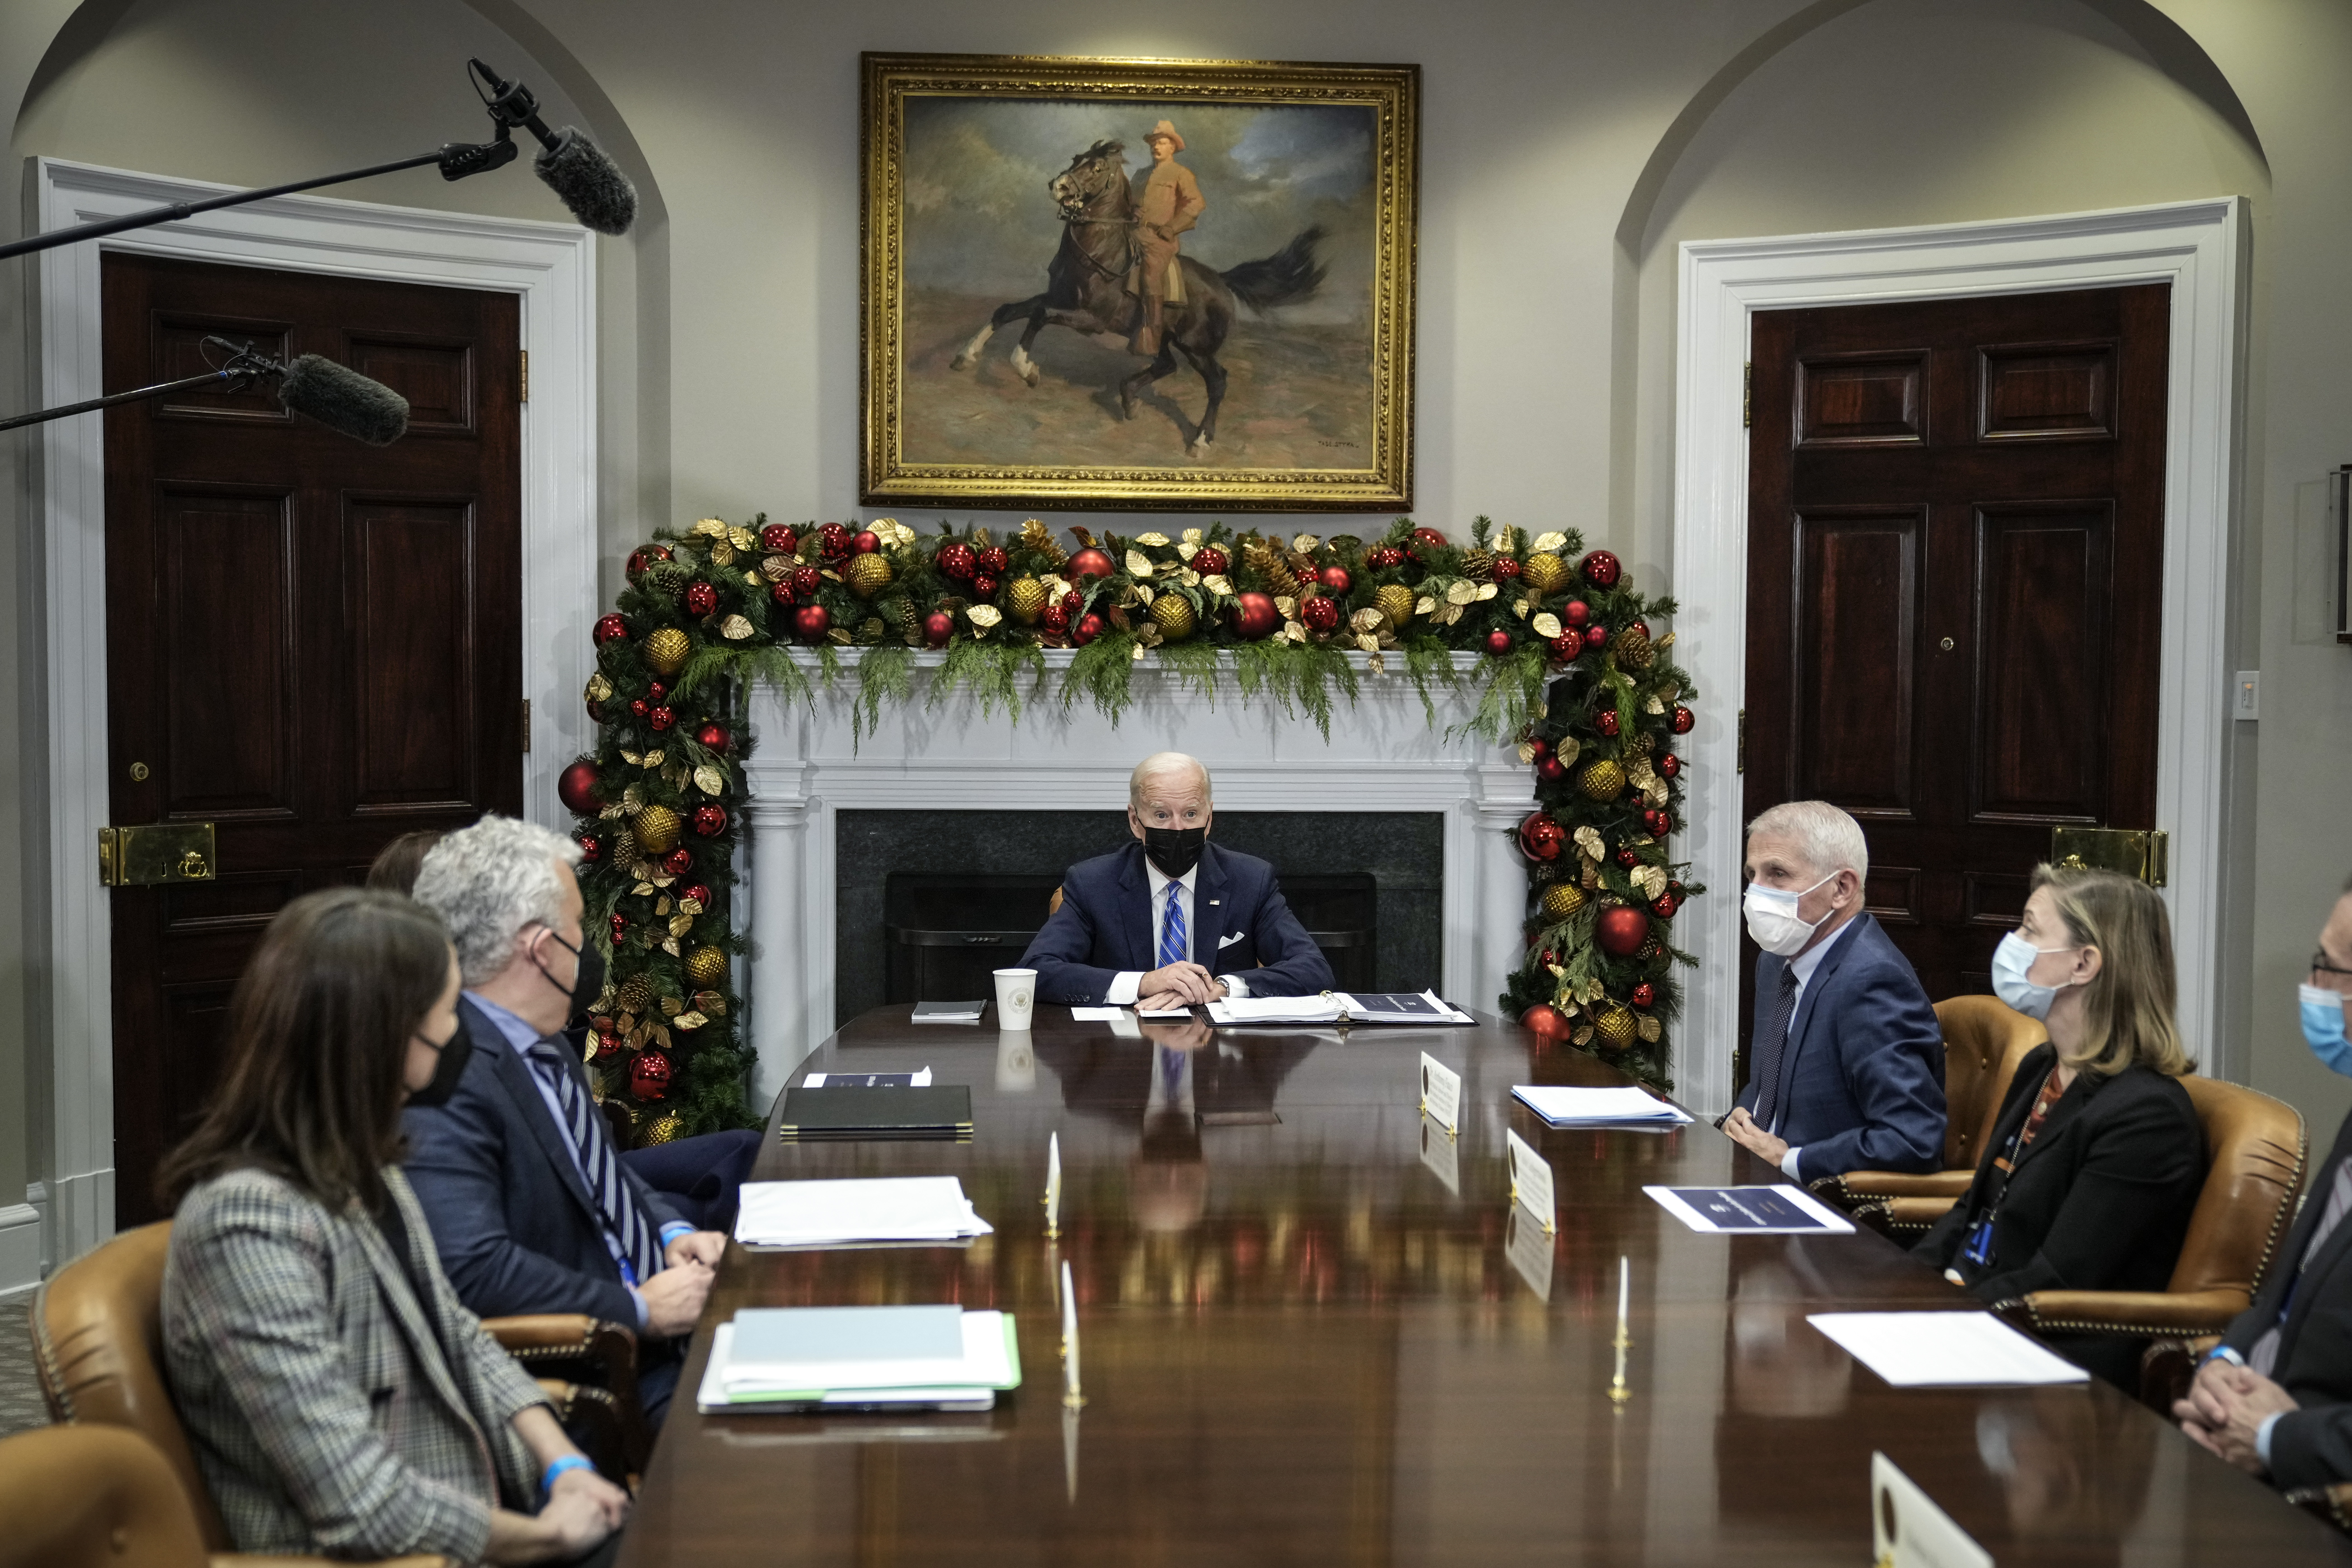 WASHINGTON, DC - DECEMBER 16: U.S. President Joe Biden speaks during a meeting with the White House COVID-19 Response Team in the Roosevelt Room of the White House December 16, 2021 in Washington, DC. Biden made a brief statement to the press regarding the Omicron variant of the coronavirus. (Photo by Drew Angerer/Getty Images)